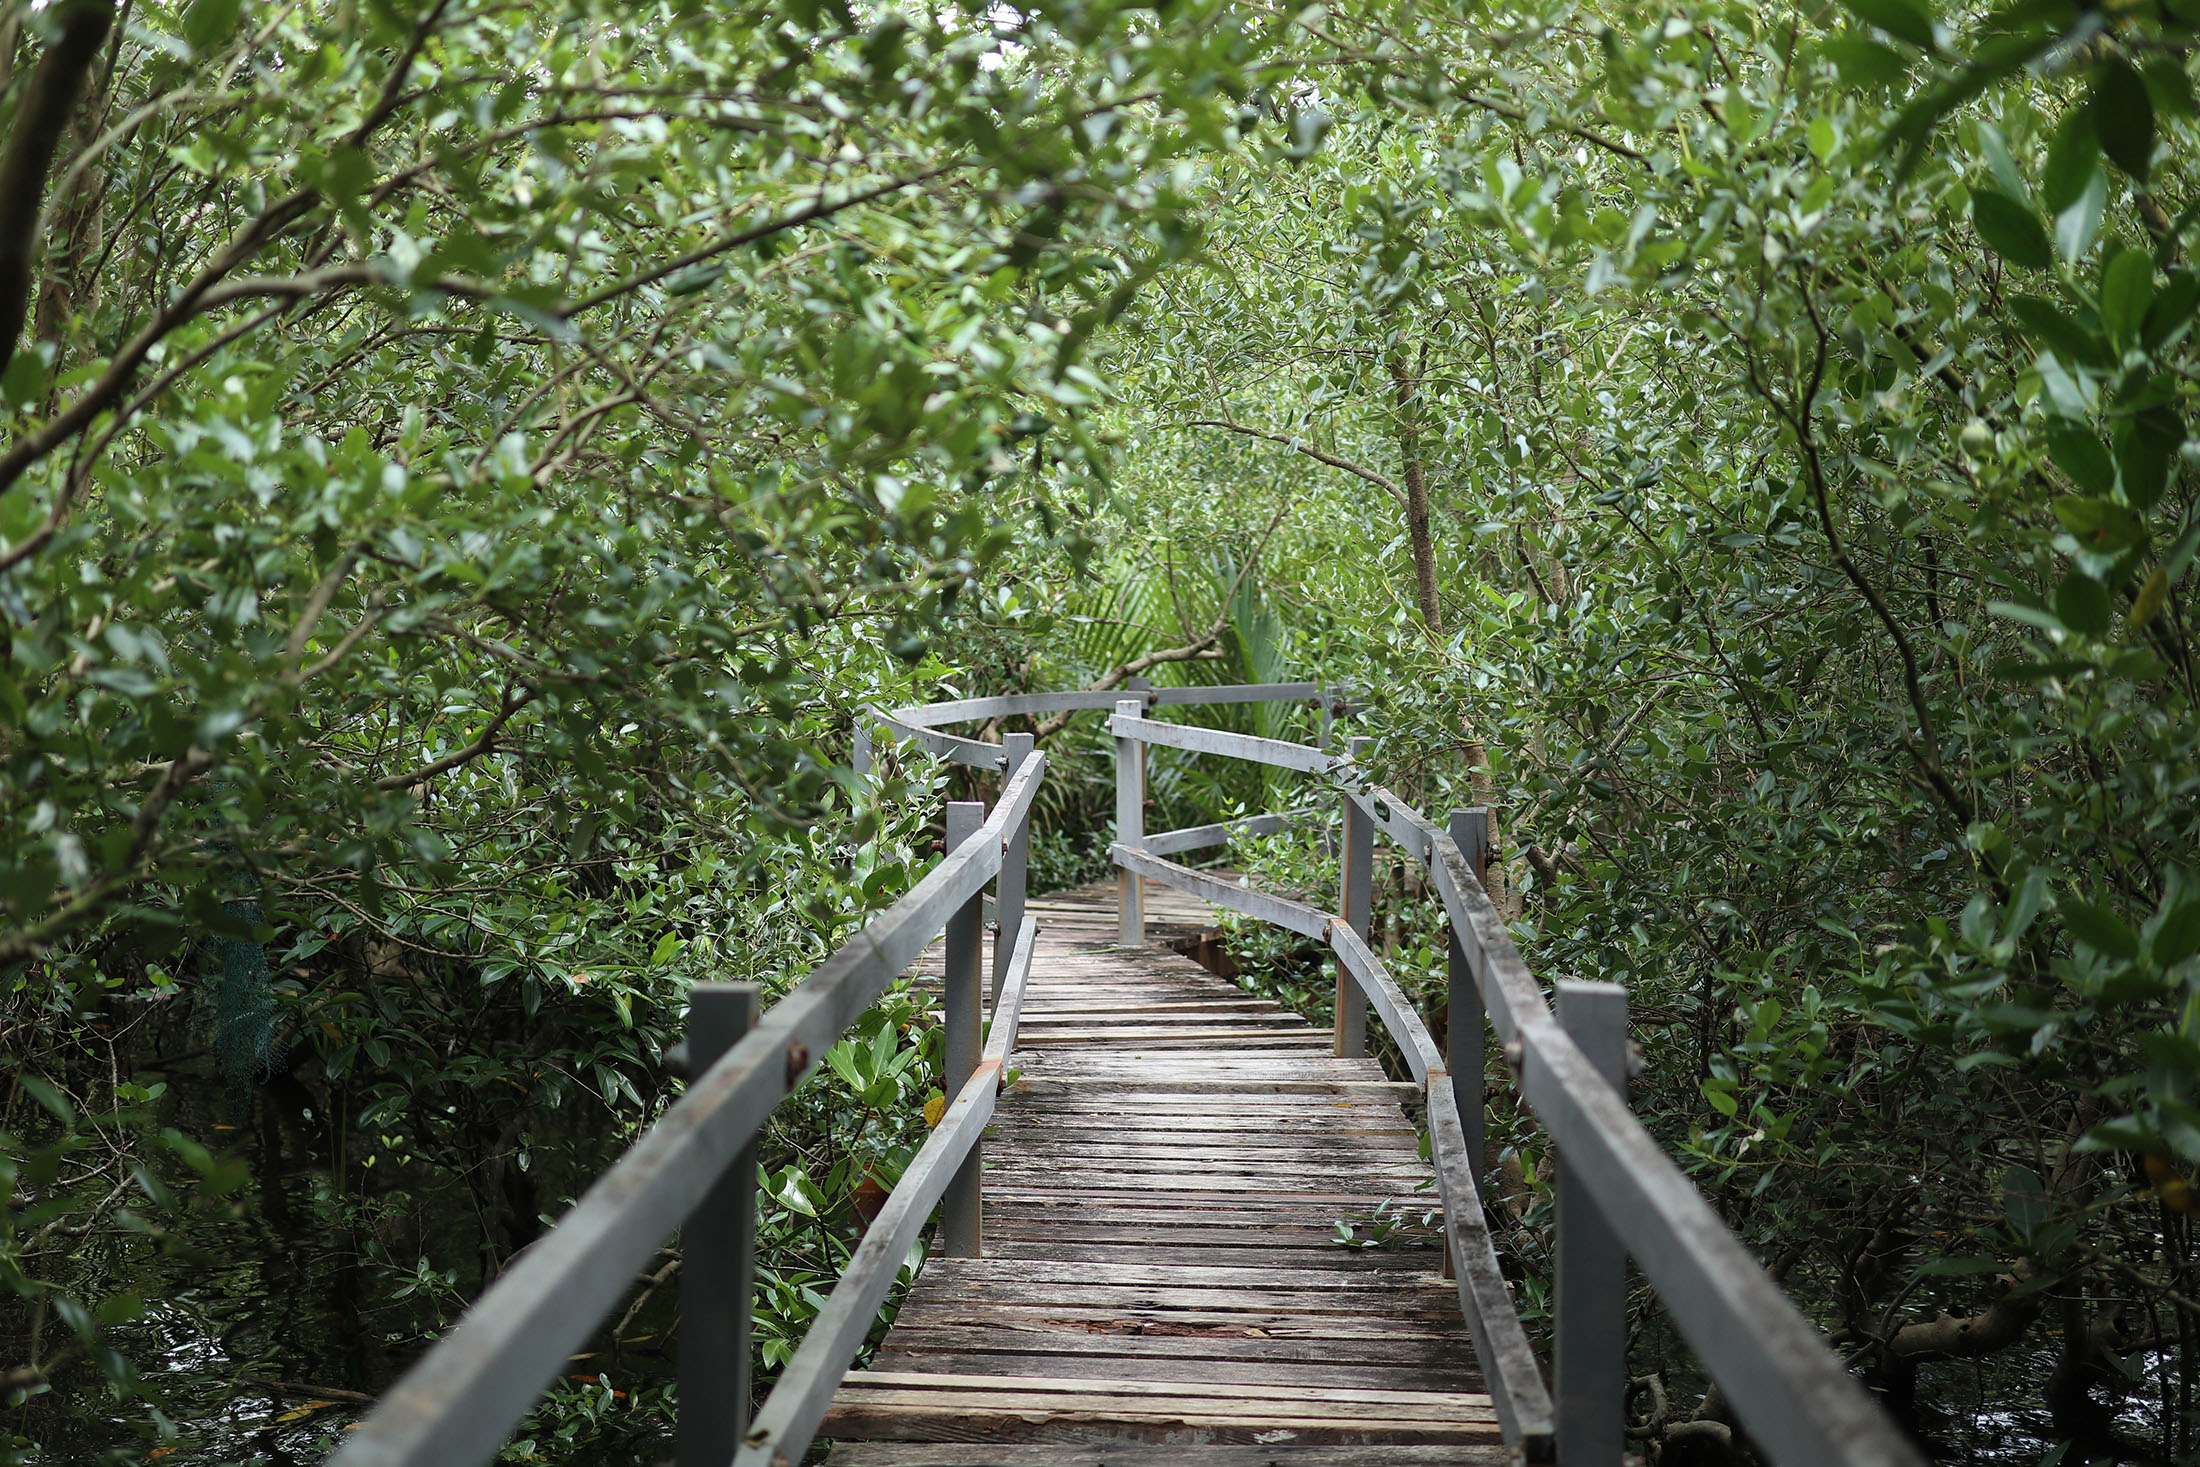 Arch and walkway at the Paraiso mangrove eco park